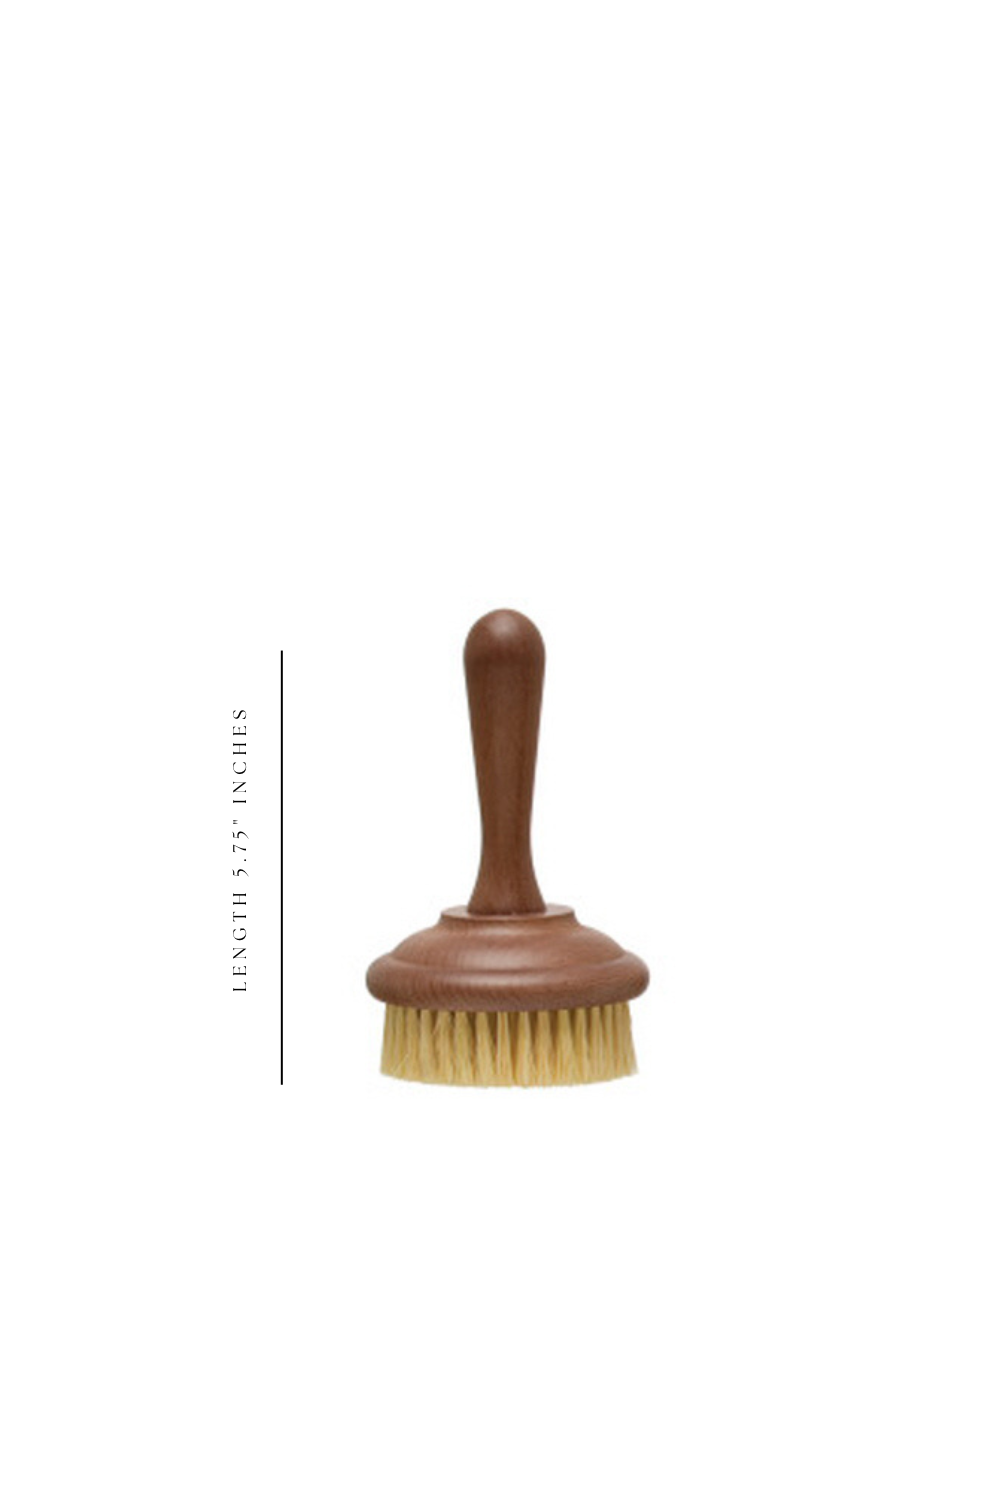 Dish Soap Brush - Luxe B Co